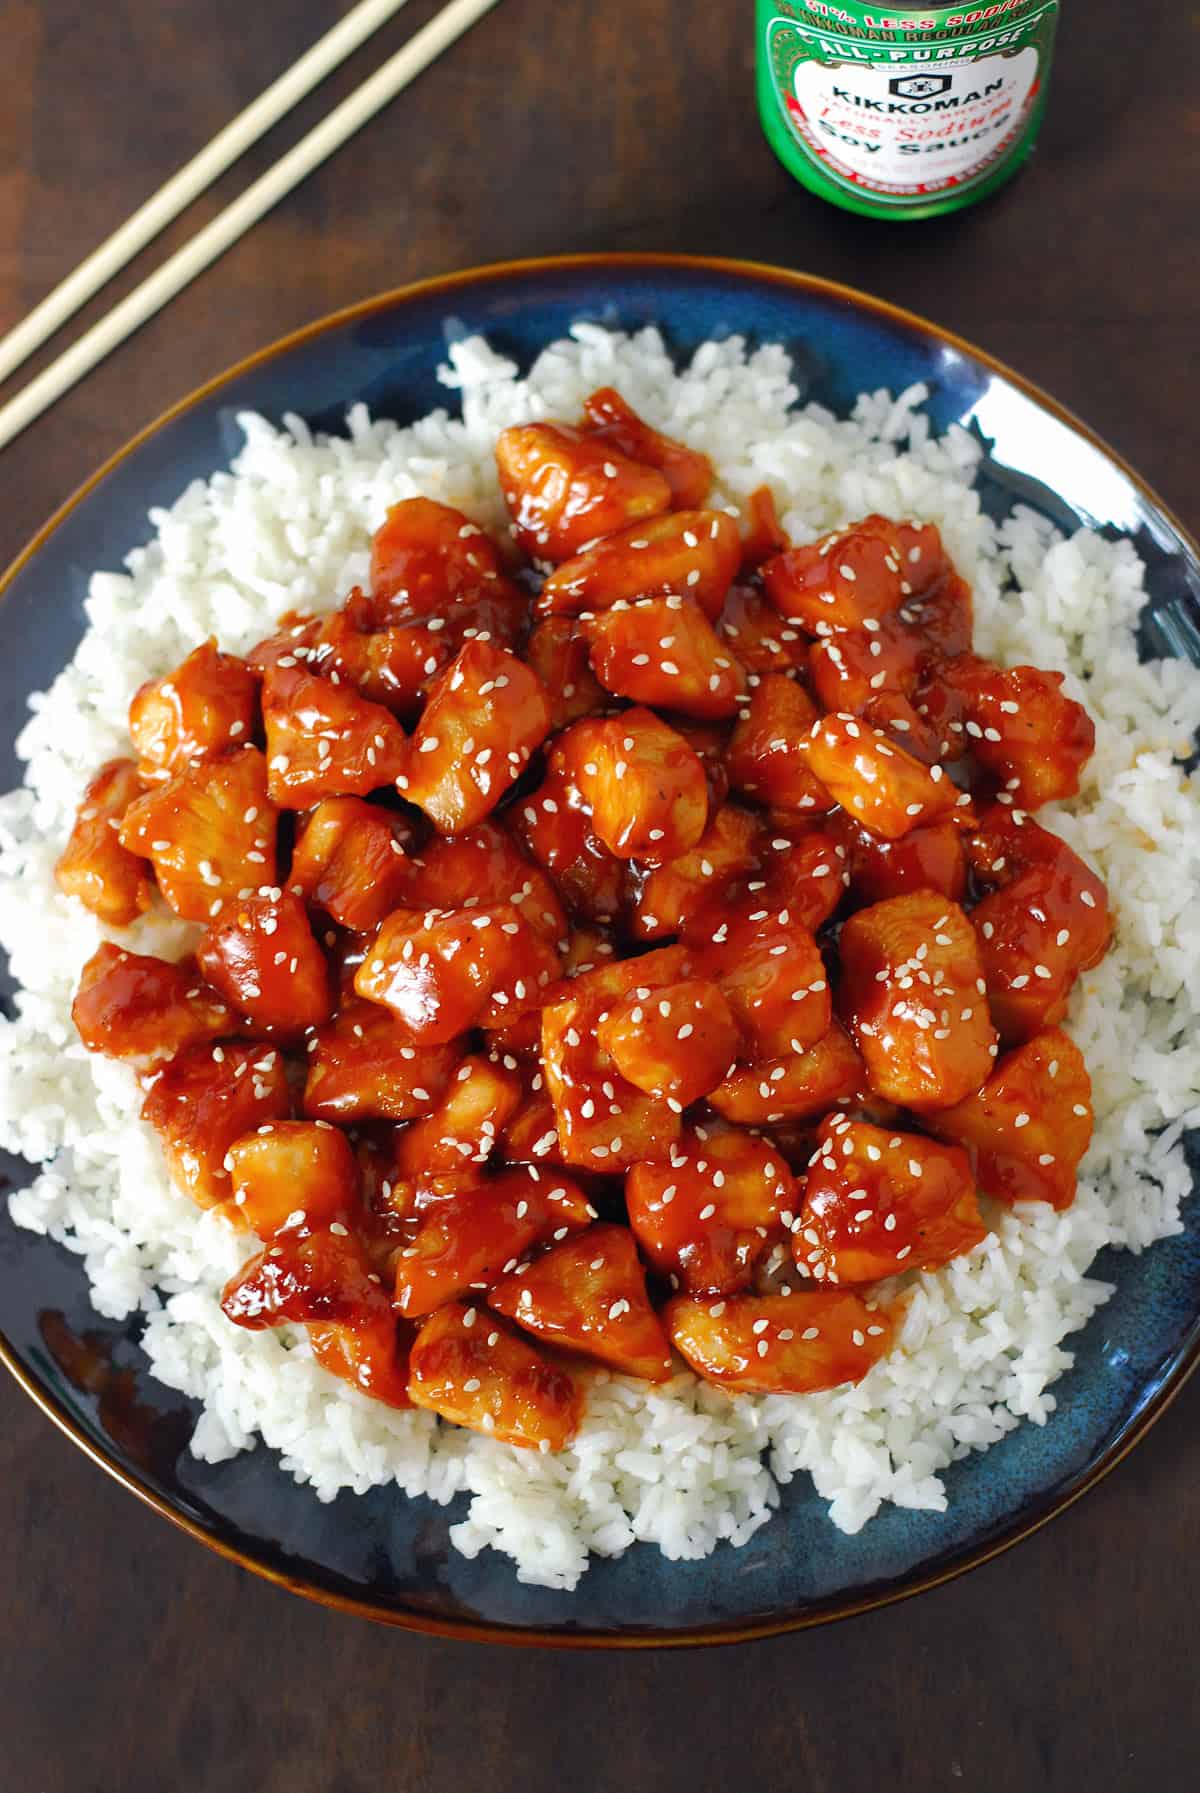 Orange chicken with rice on a blue plate.